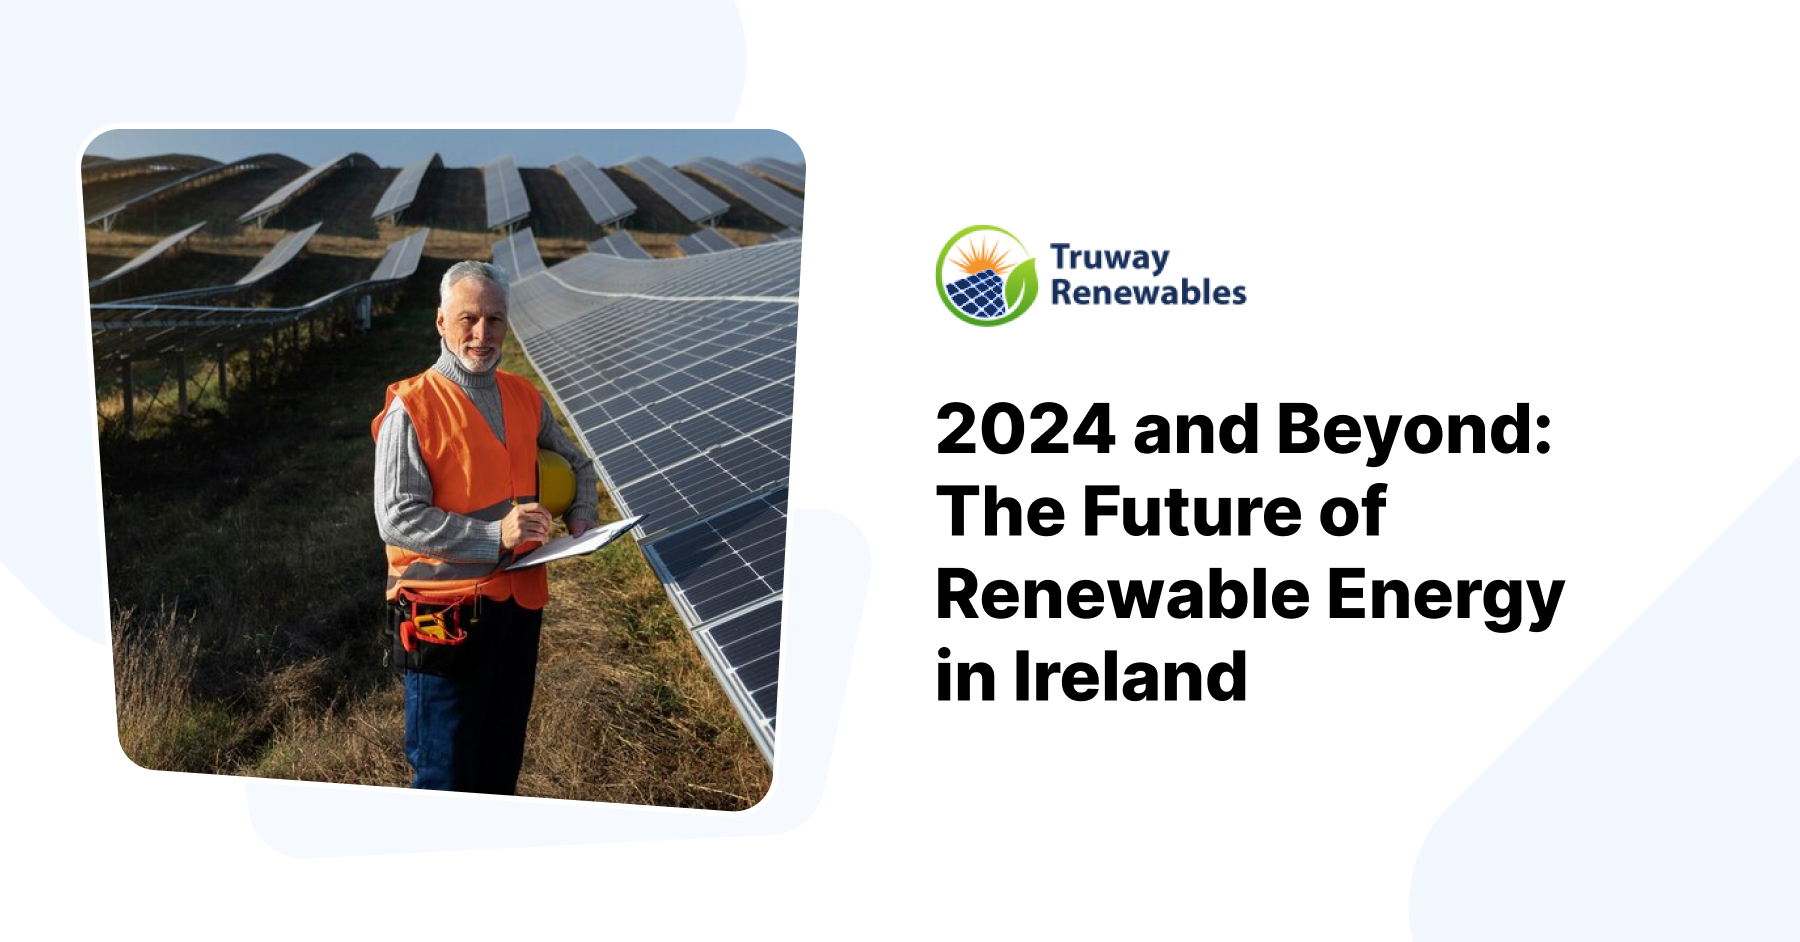 2024 and Beyond: The Future of Renewable Energy in Ireland